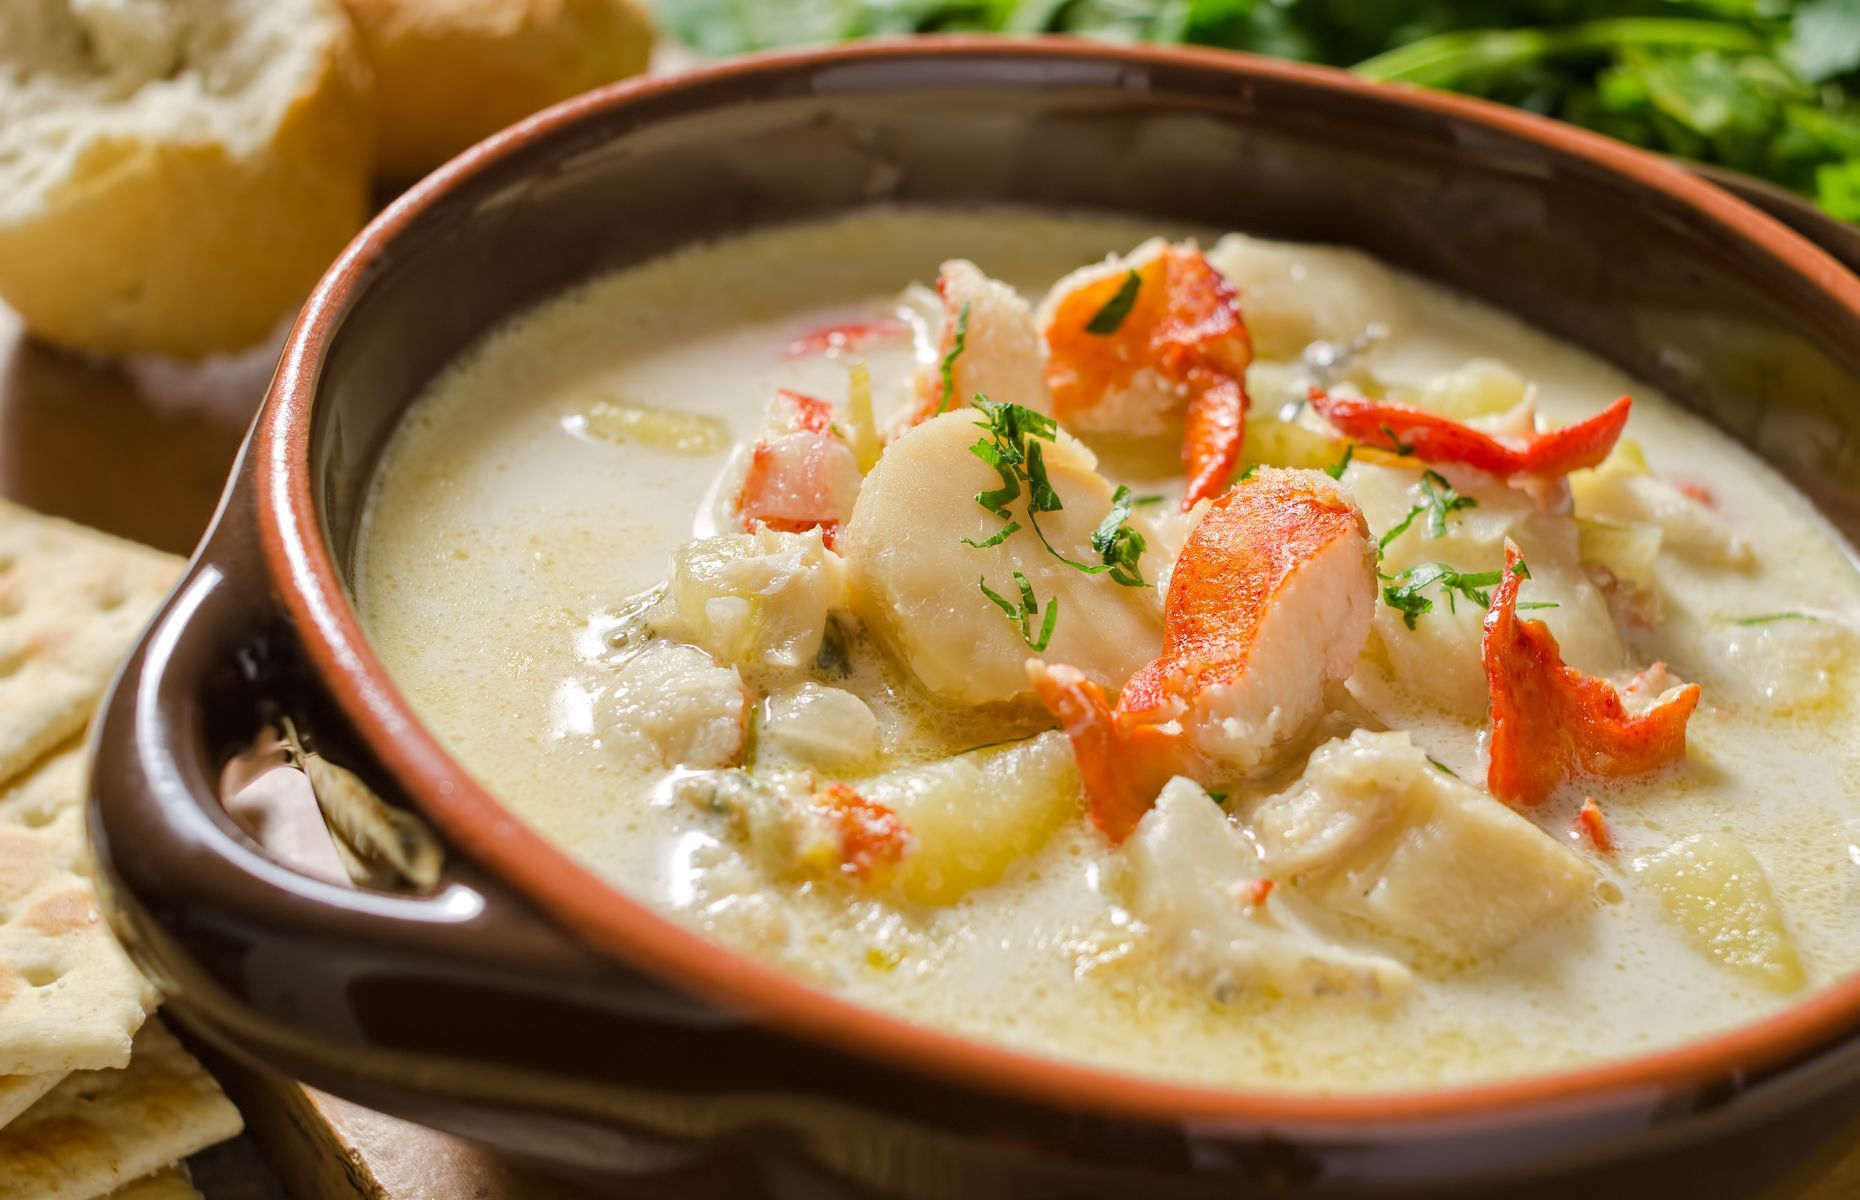 <p>In addition to its traditional stew, Ireland boasts a comforting and varied <a href="https://www.tasteofhome.com/collection/traditional-irish-food/" rel="noreferrer noopener">cuisine</a> featuring smoked salmon dishes, seafood chowders, soda bread, and its famous boxty potatoes. Whatever you do, don’t leave without enjoying a delicious Irish coffee with whipped cream and a splash of local whiskey.</p>